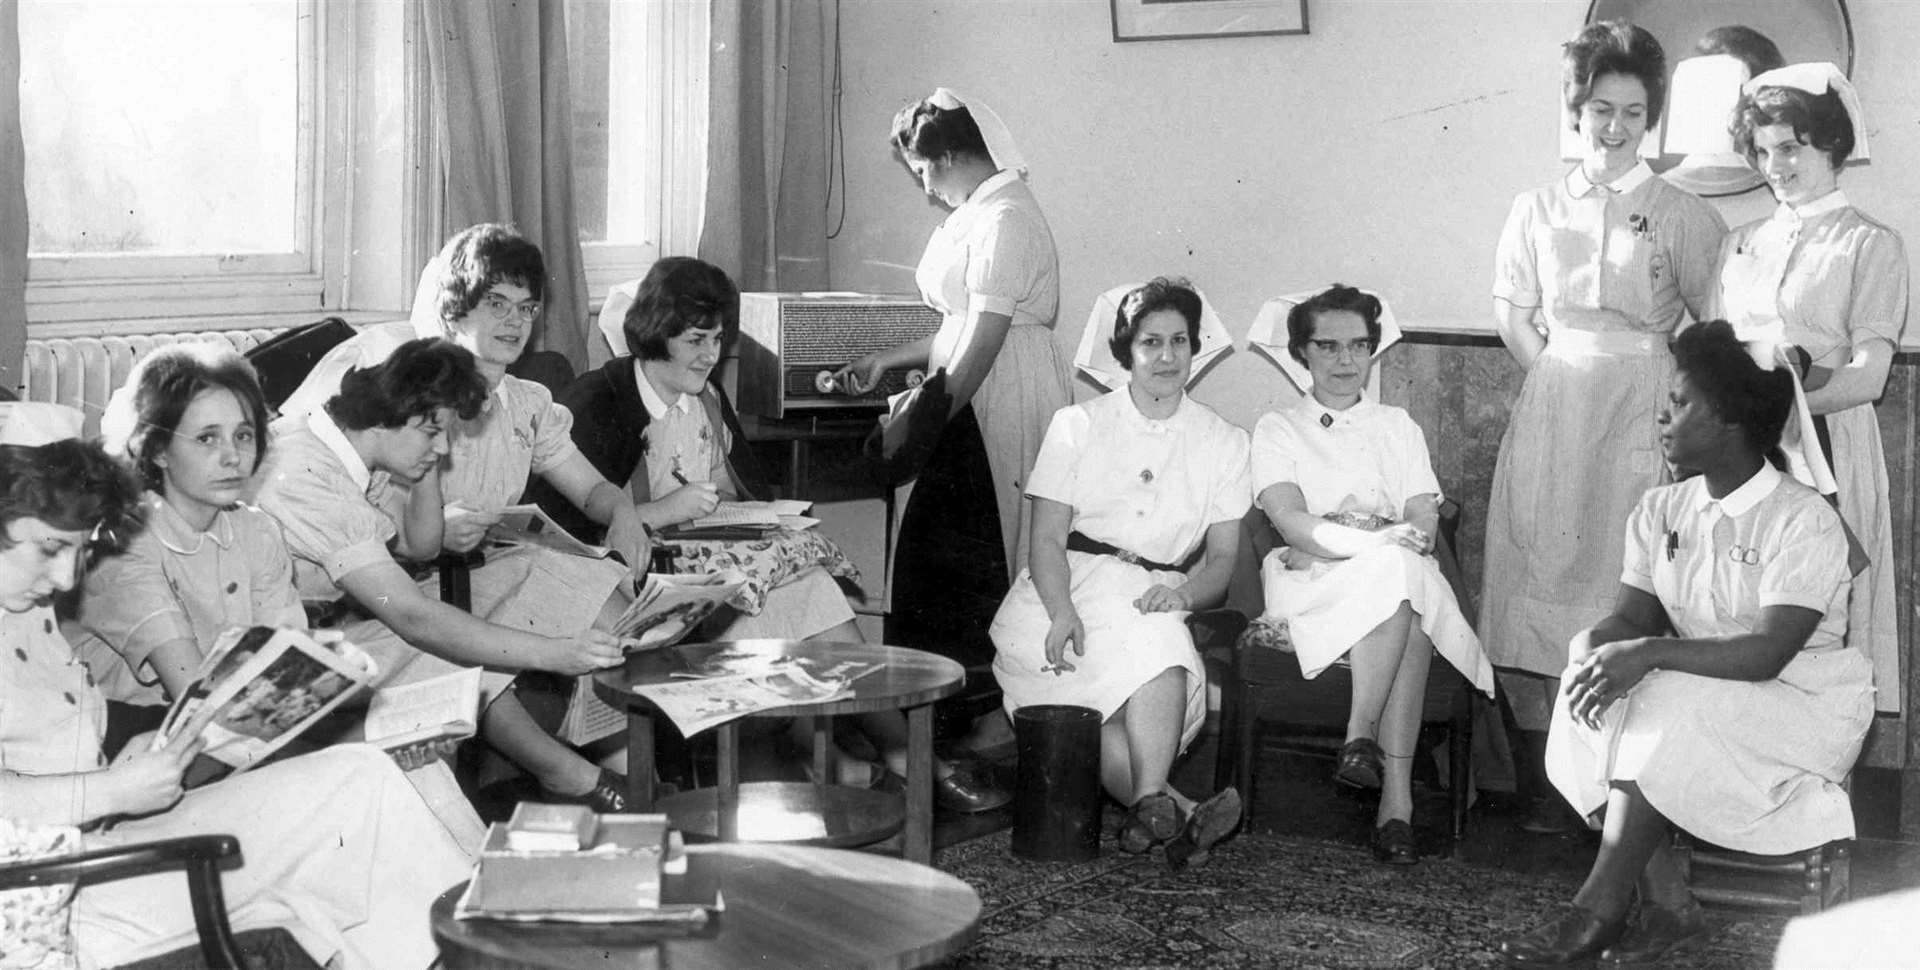 St Bart's nurses in Rochester in 1962. Founded in 1078 for the care of the poor and lepers, the hospital was later taken over by the NHS before closing permanently in 2016